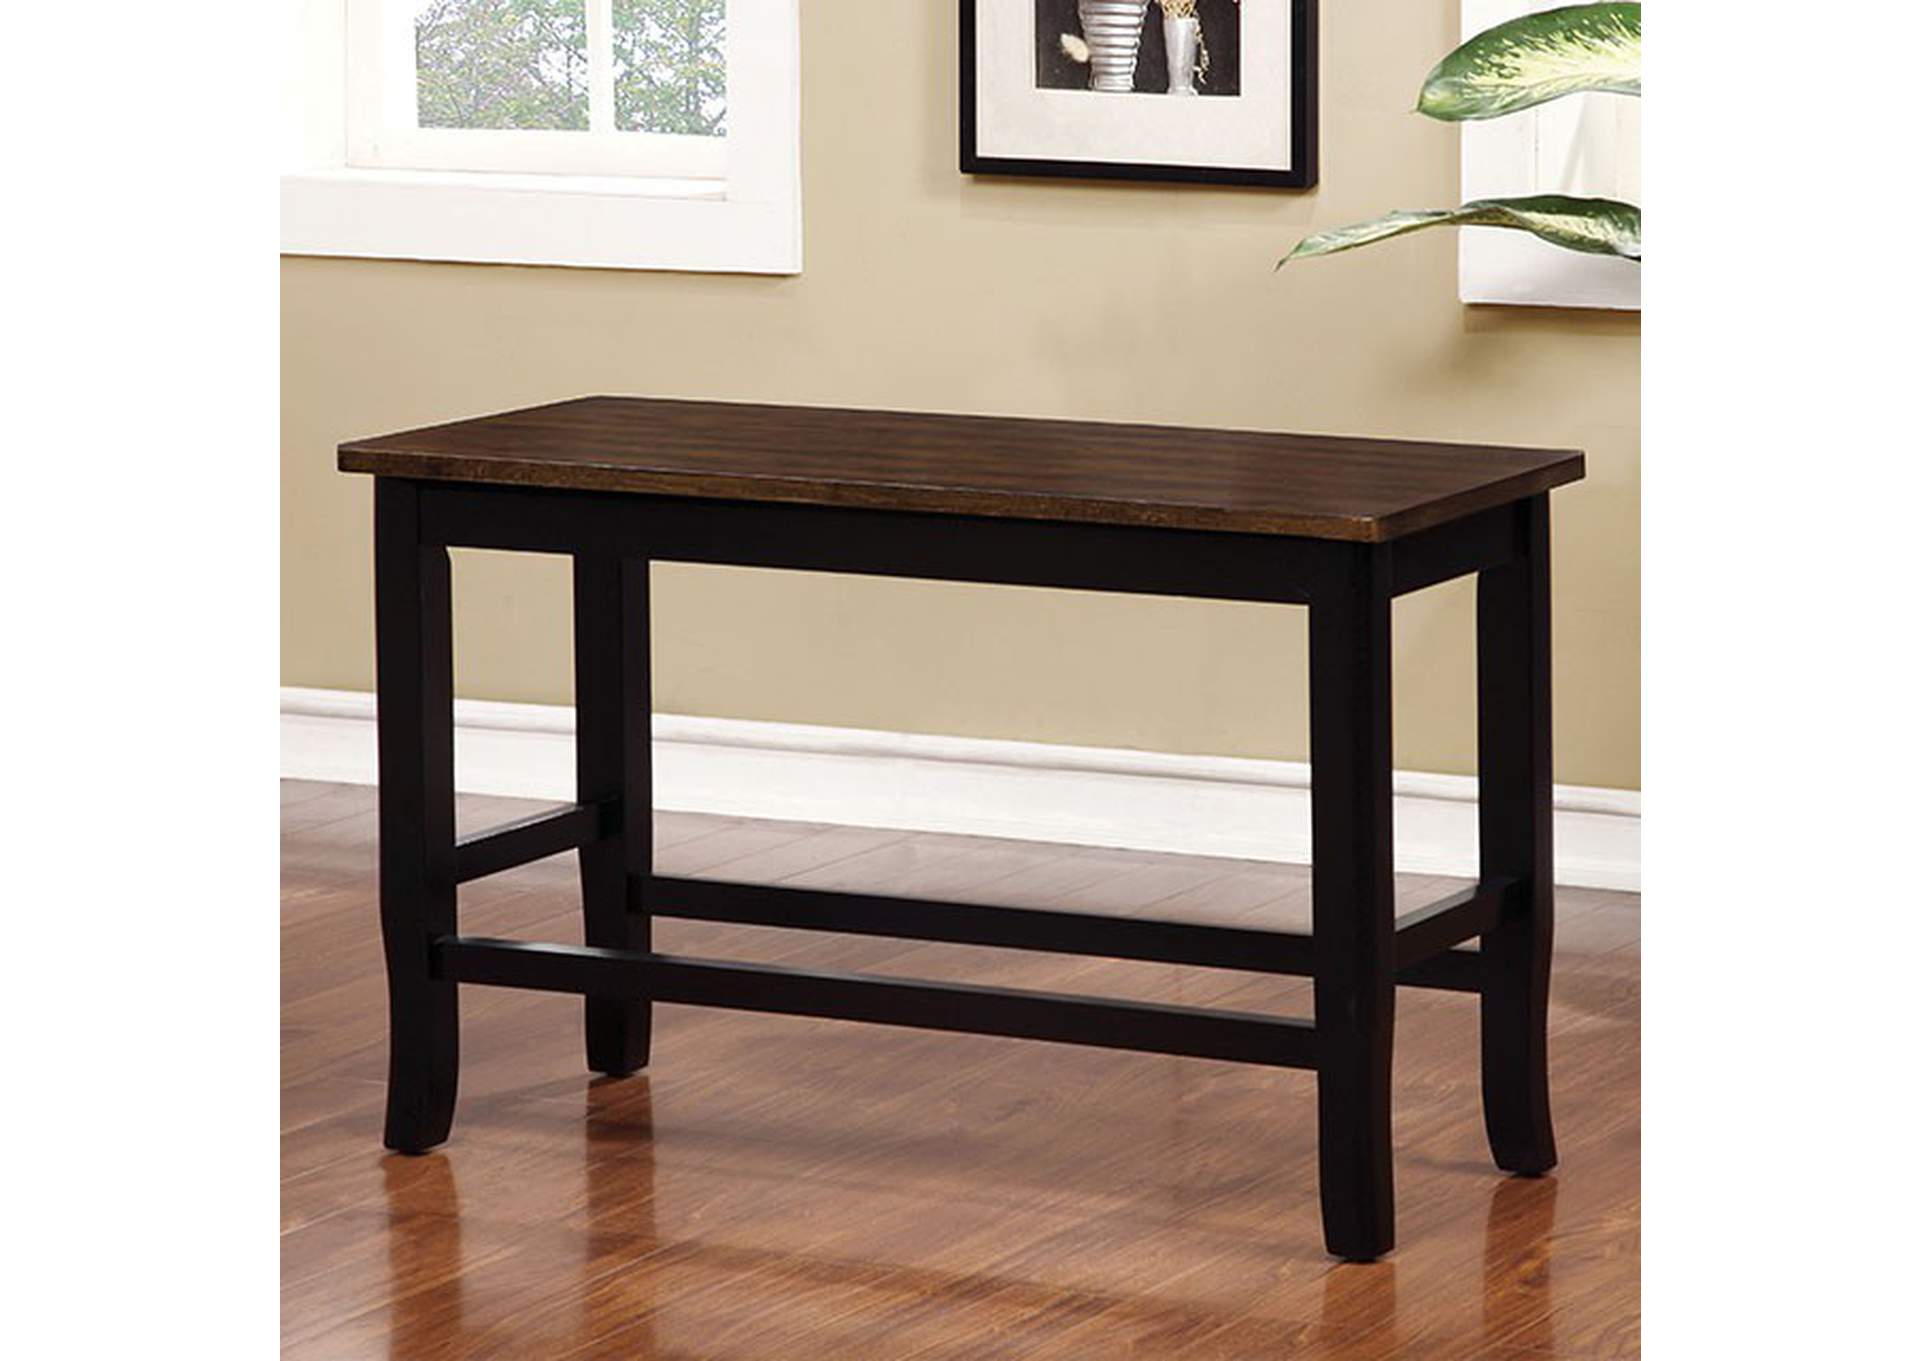 Dover Counter Ht. Bench,Furniture of America